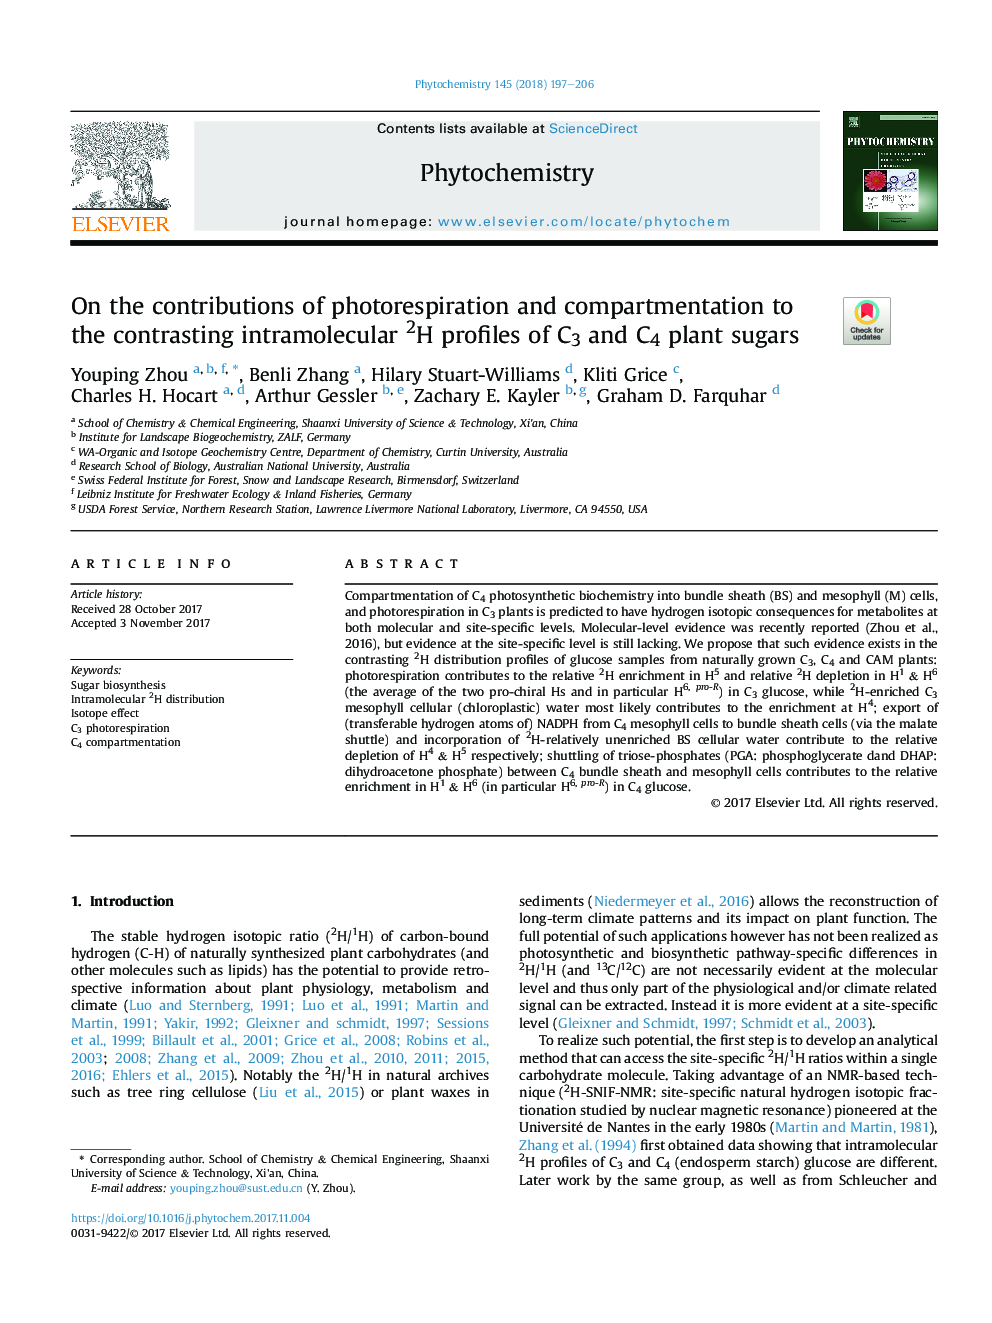 On the contributions of photorespiration and compartmentation to the contrasting intramolecular 2H profiles of C3 and C4 plant sugars